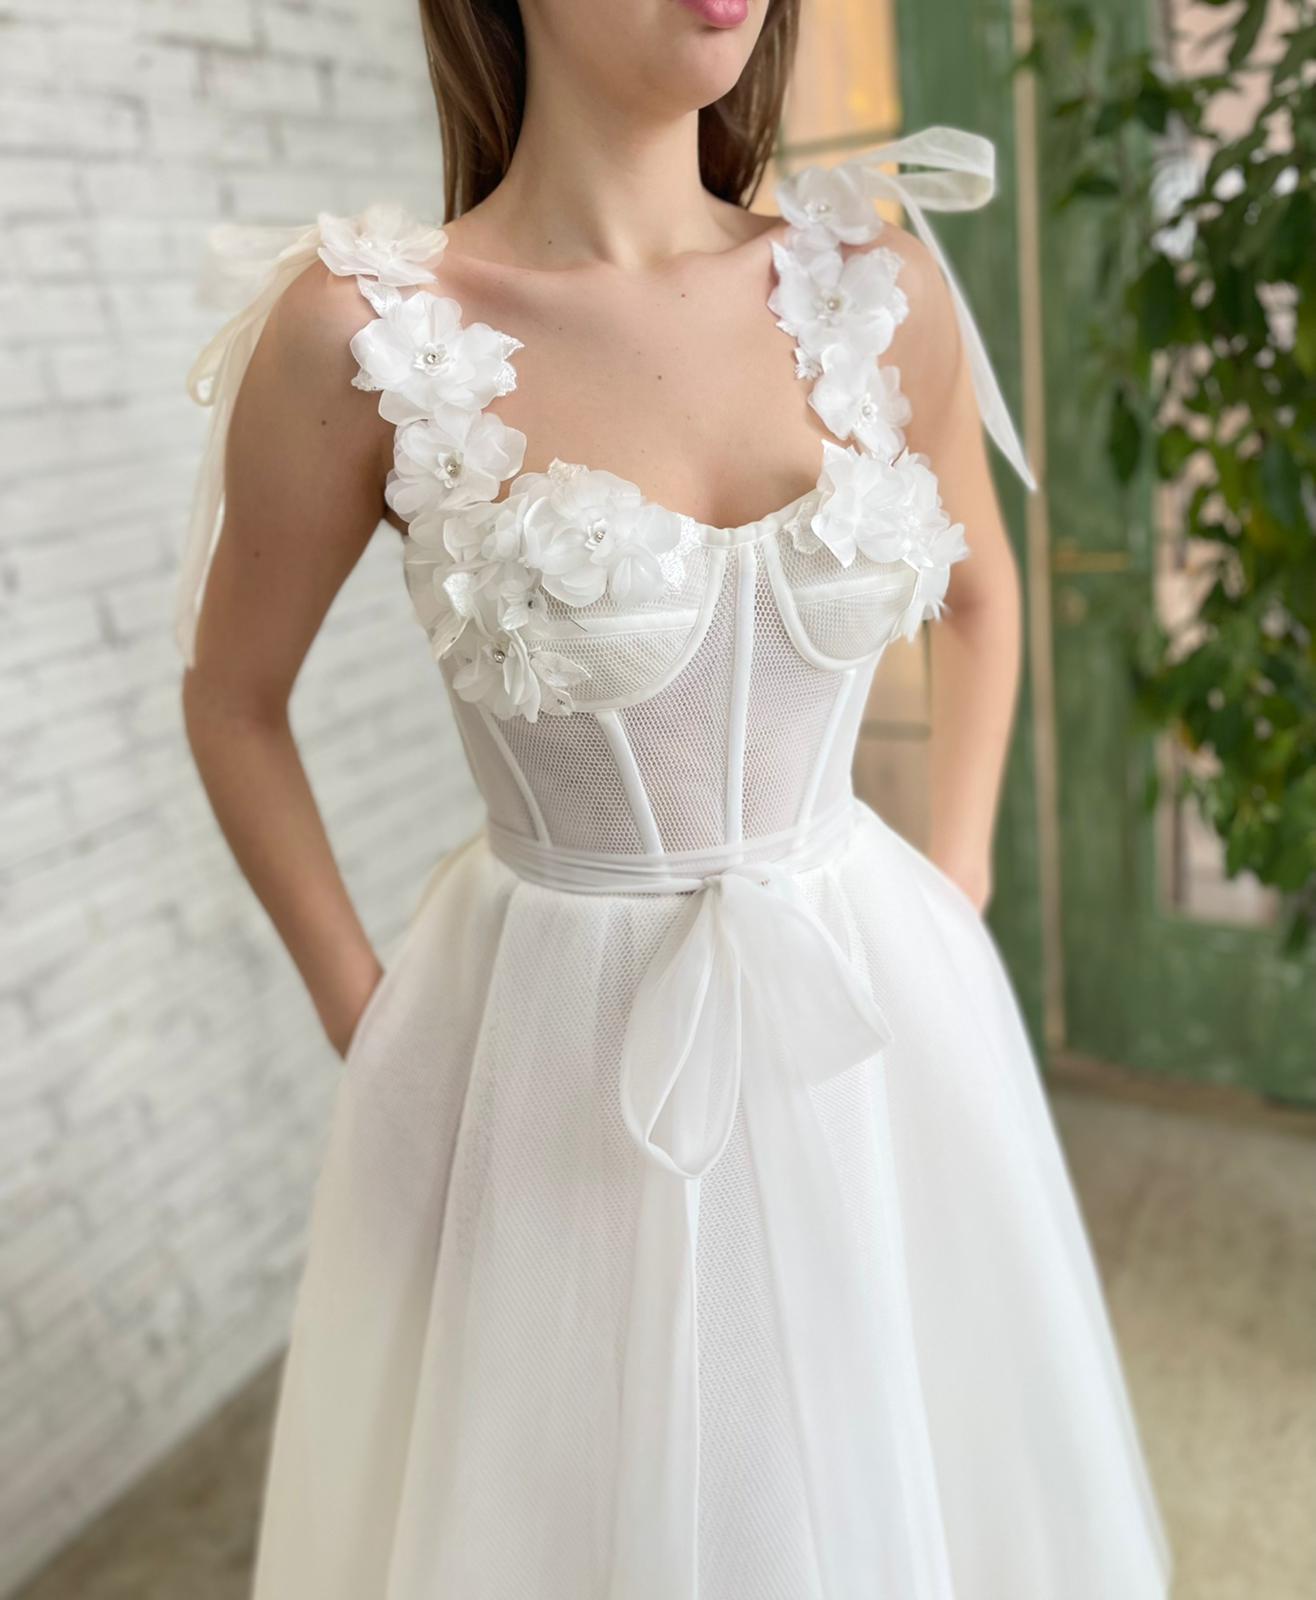 White bridal midi dress with straps, flowers and embroidery